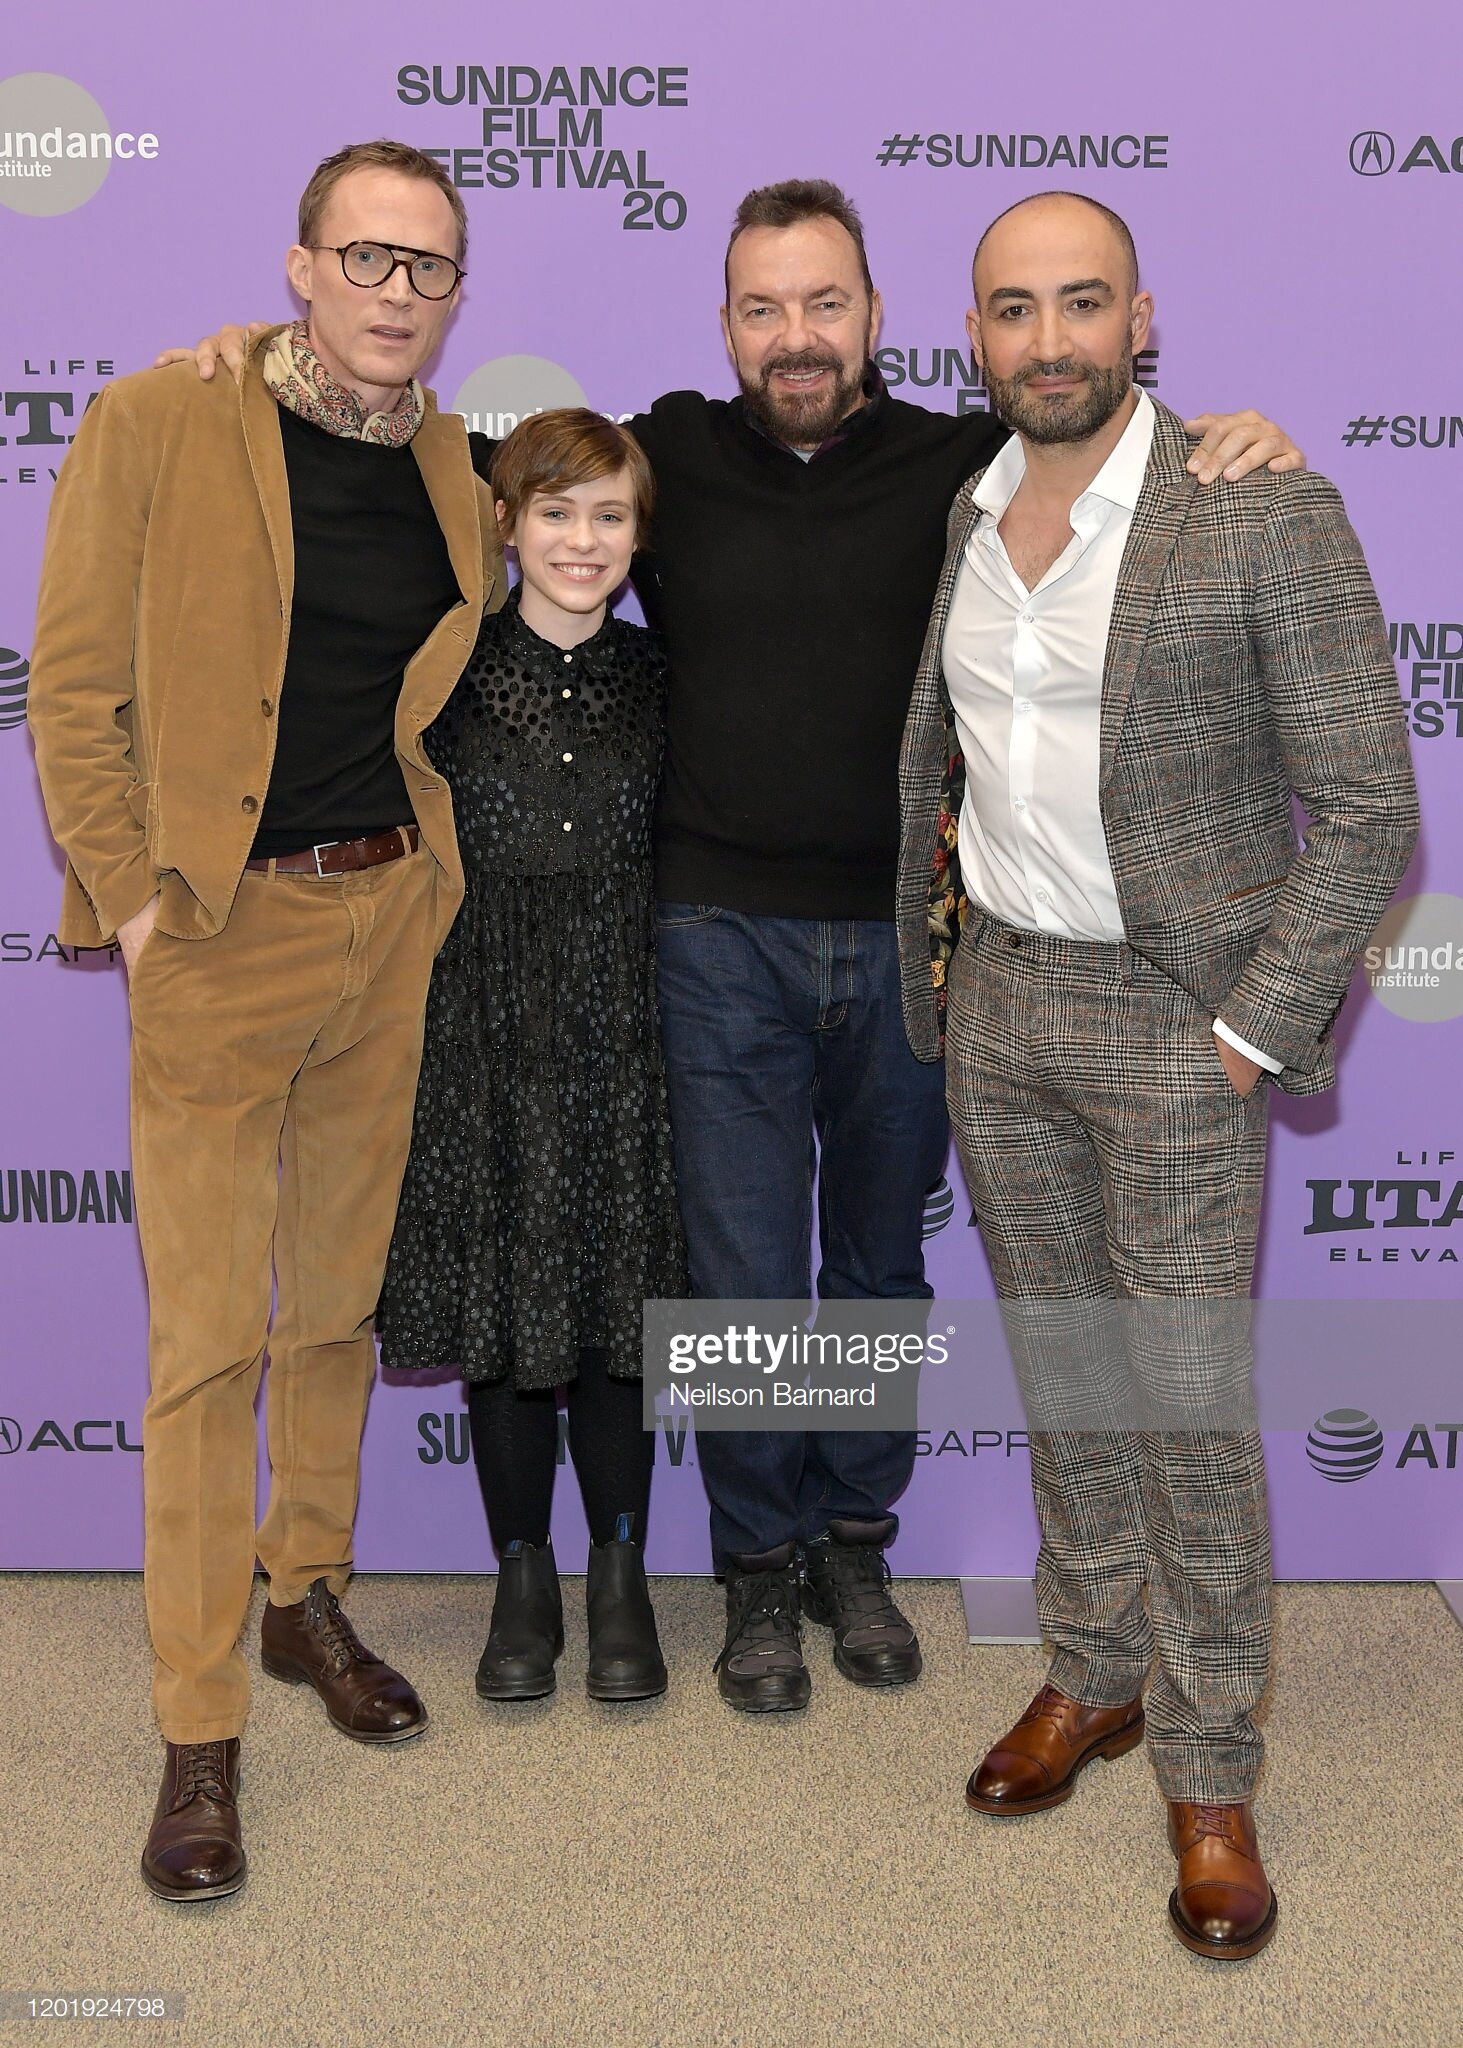 gettyimages-1201924798-2048x2048.jpg